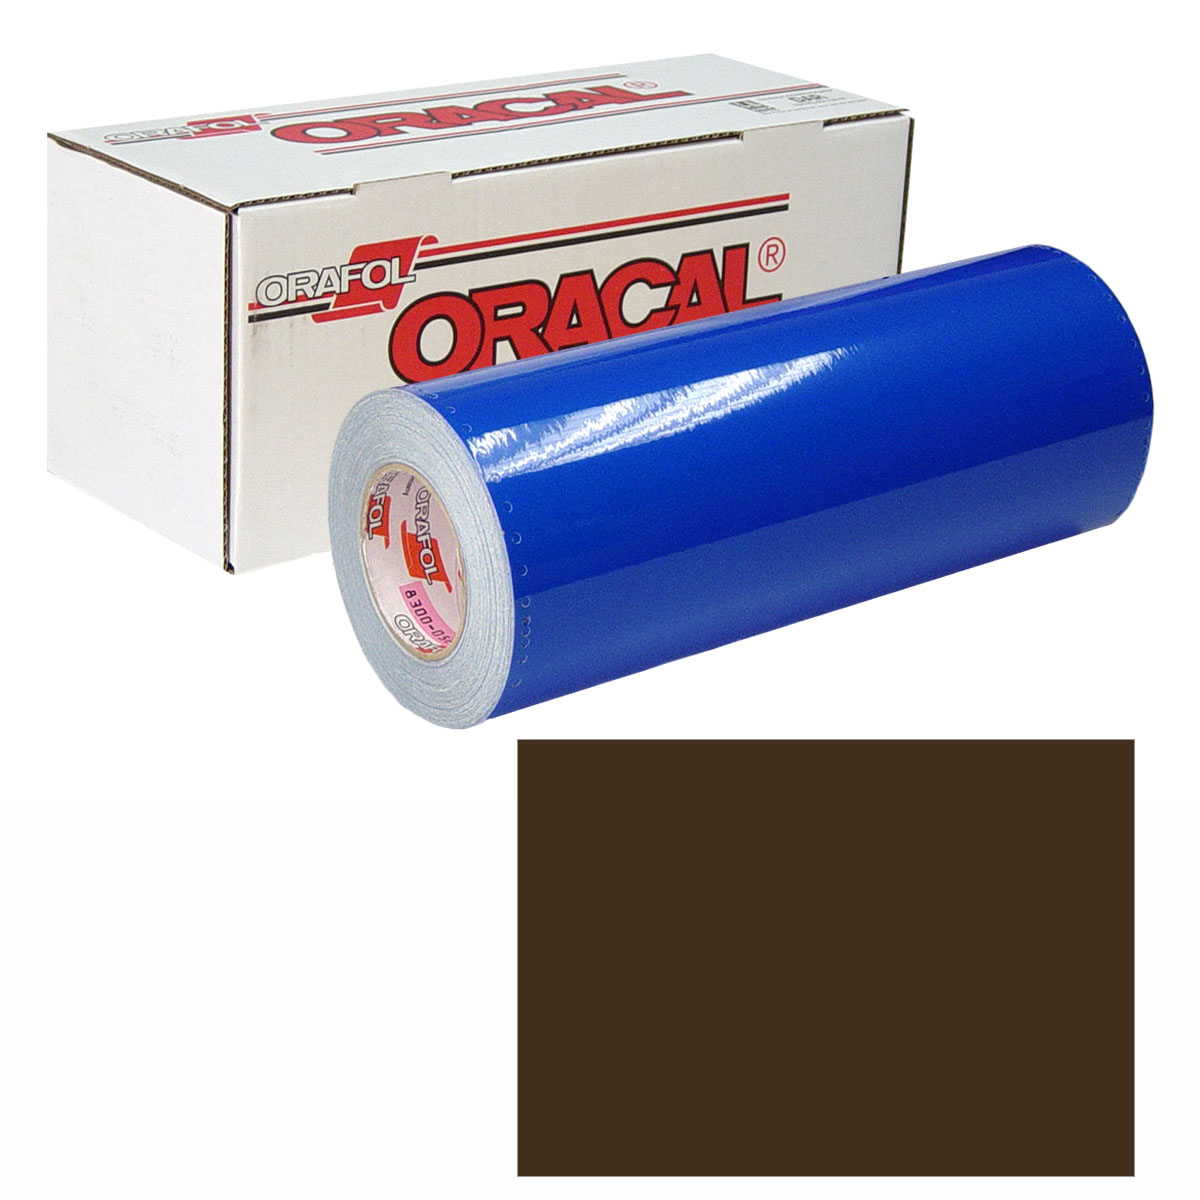 ORACAL 631 15in X 10yd 080 Brown